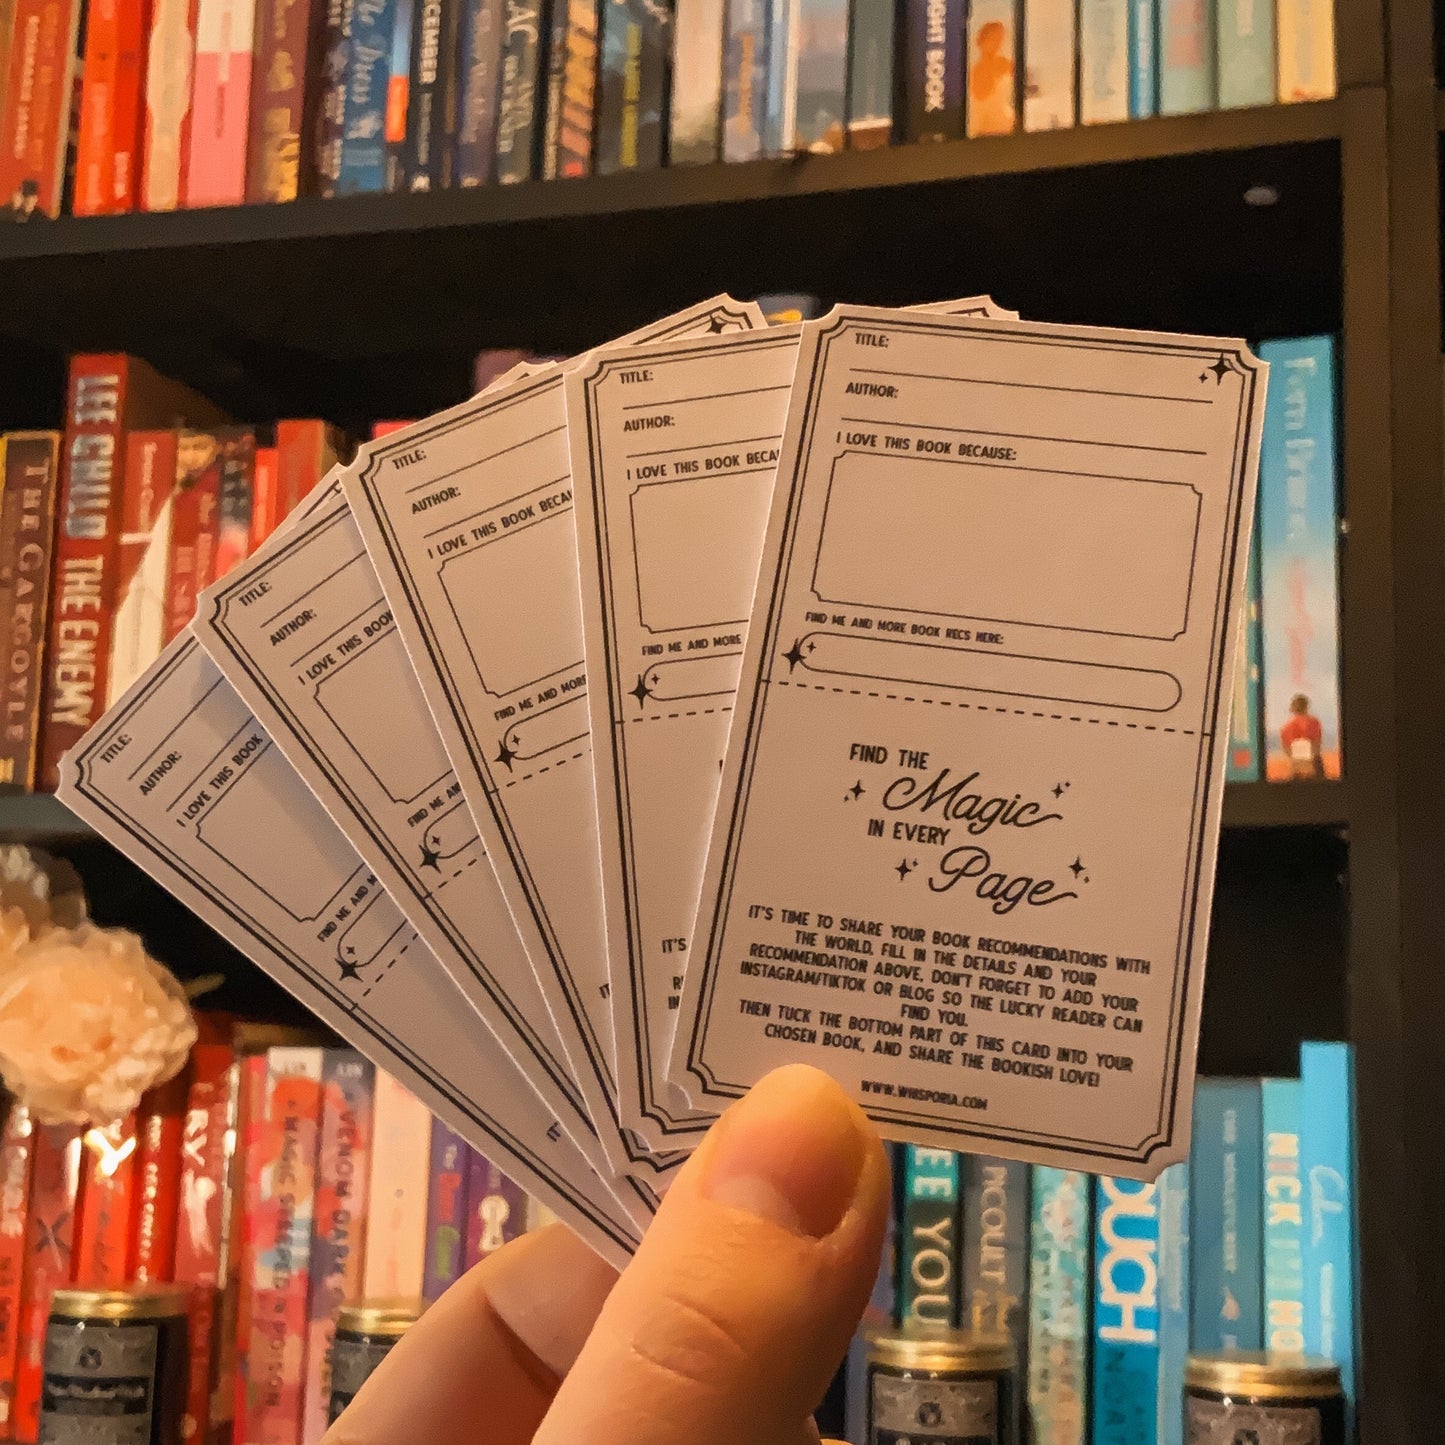 Book Recommendation Cards